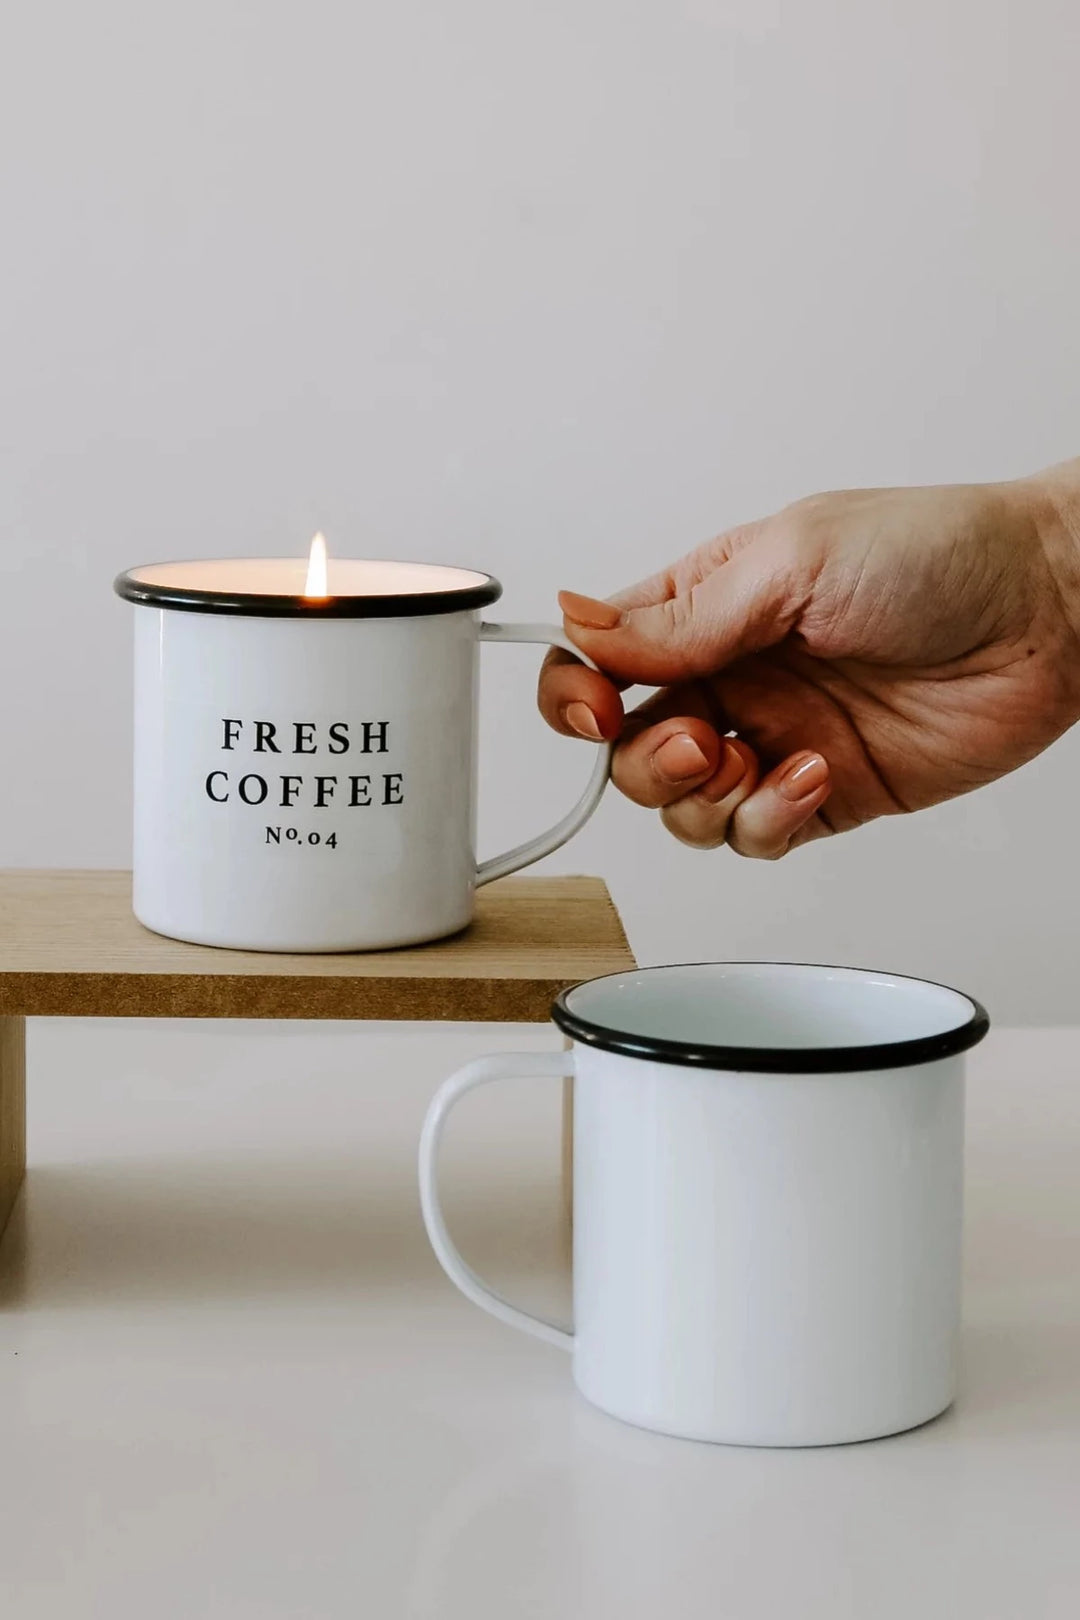 SWEET WATER DECOR - FRESH COFFEE SOY CANDLE - MUG CANDLE. JAYDEN P BOUTIQUE